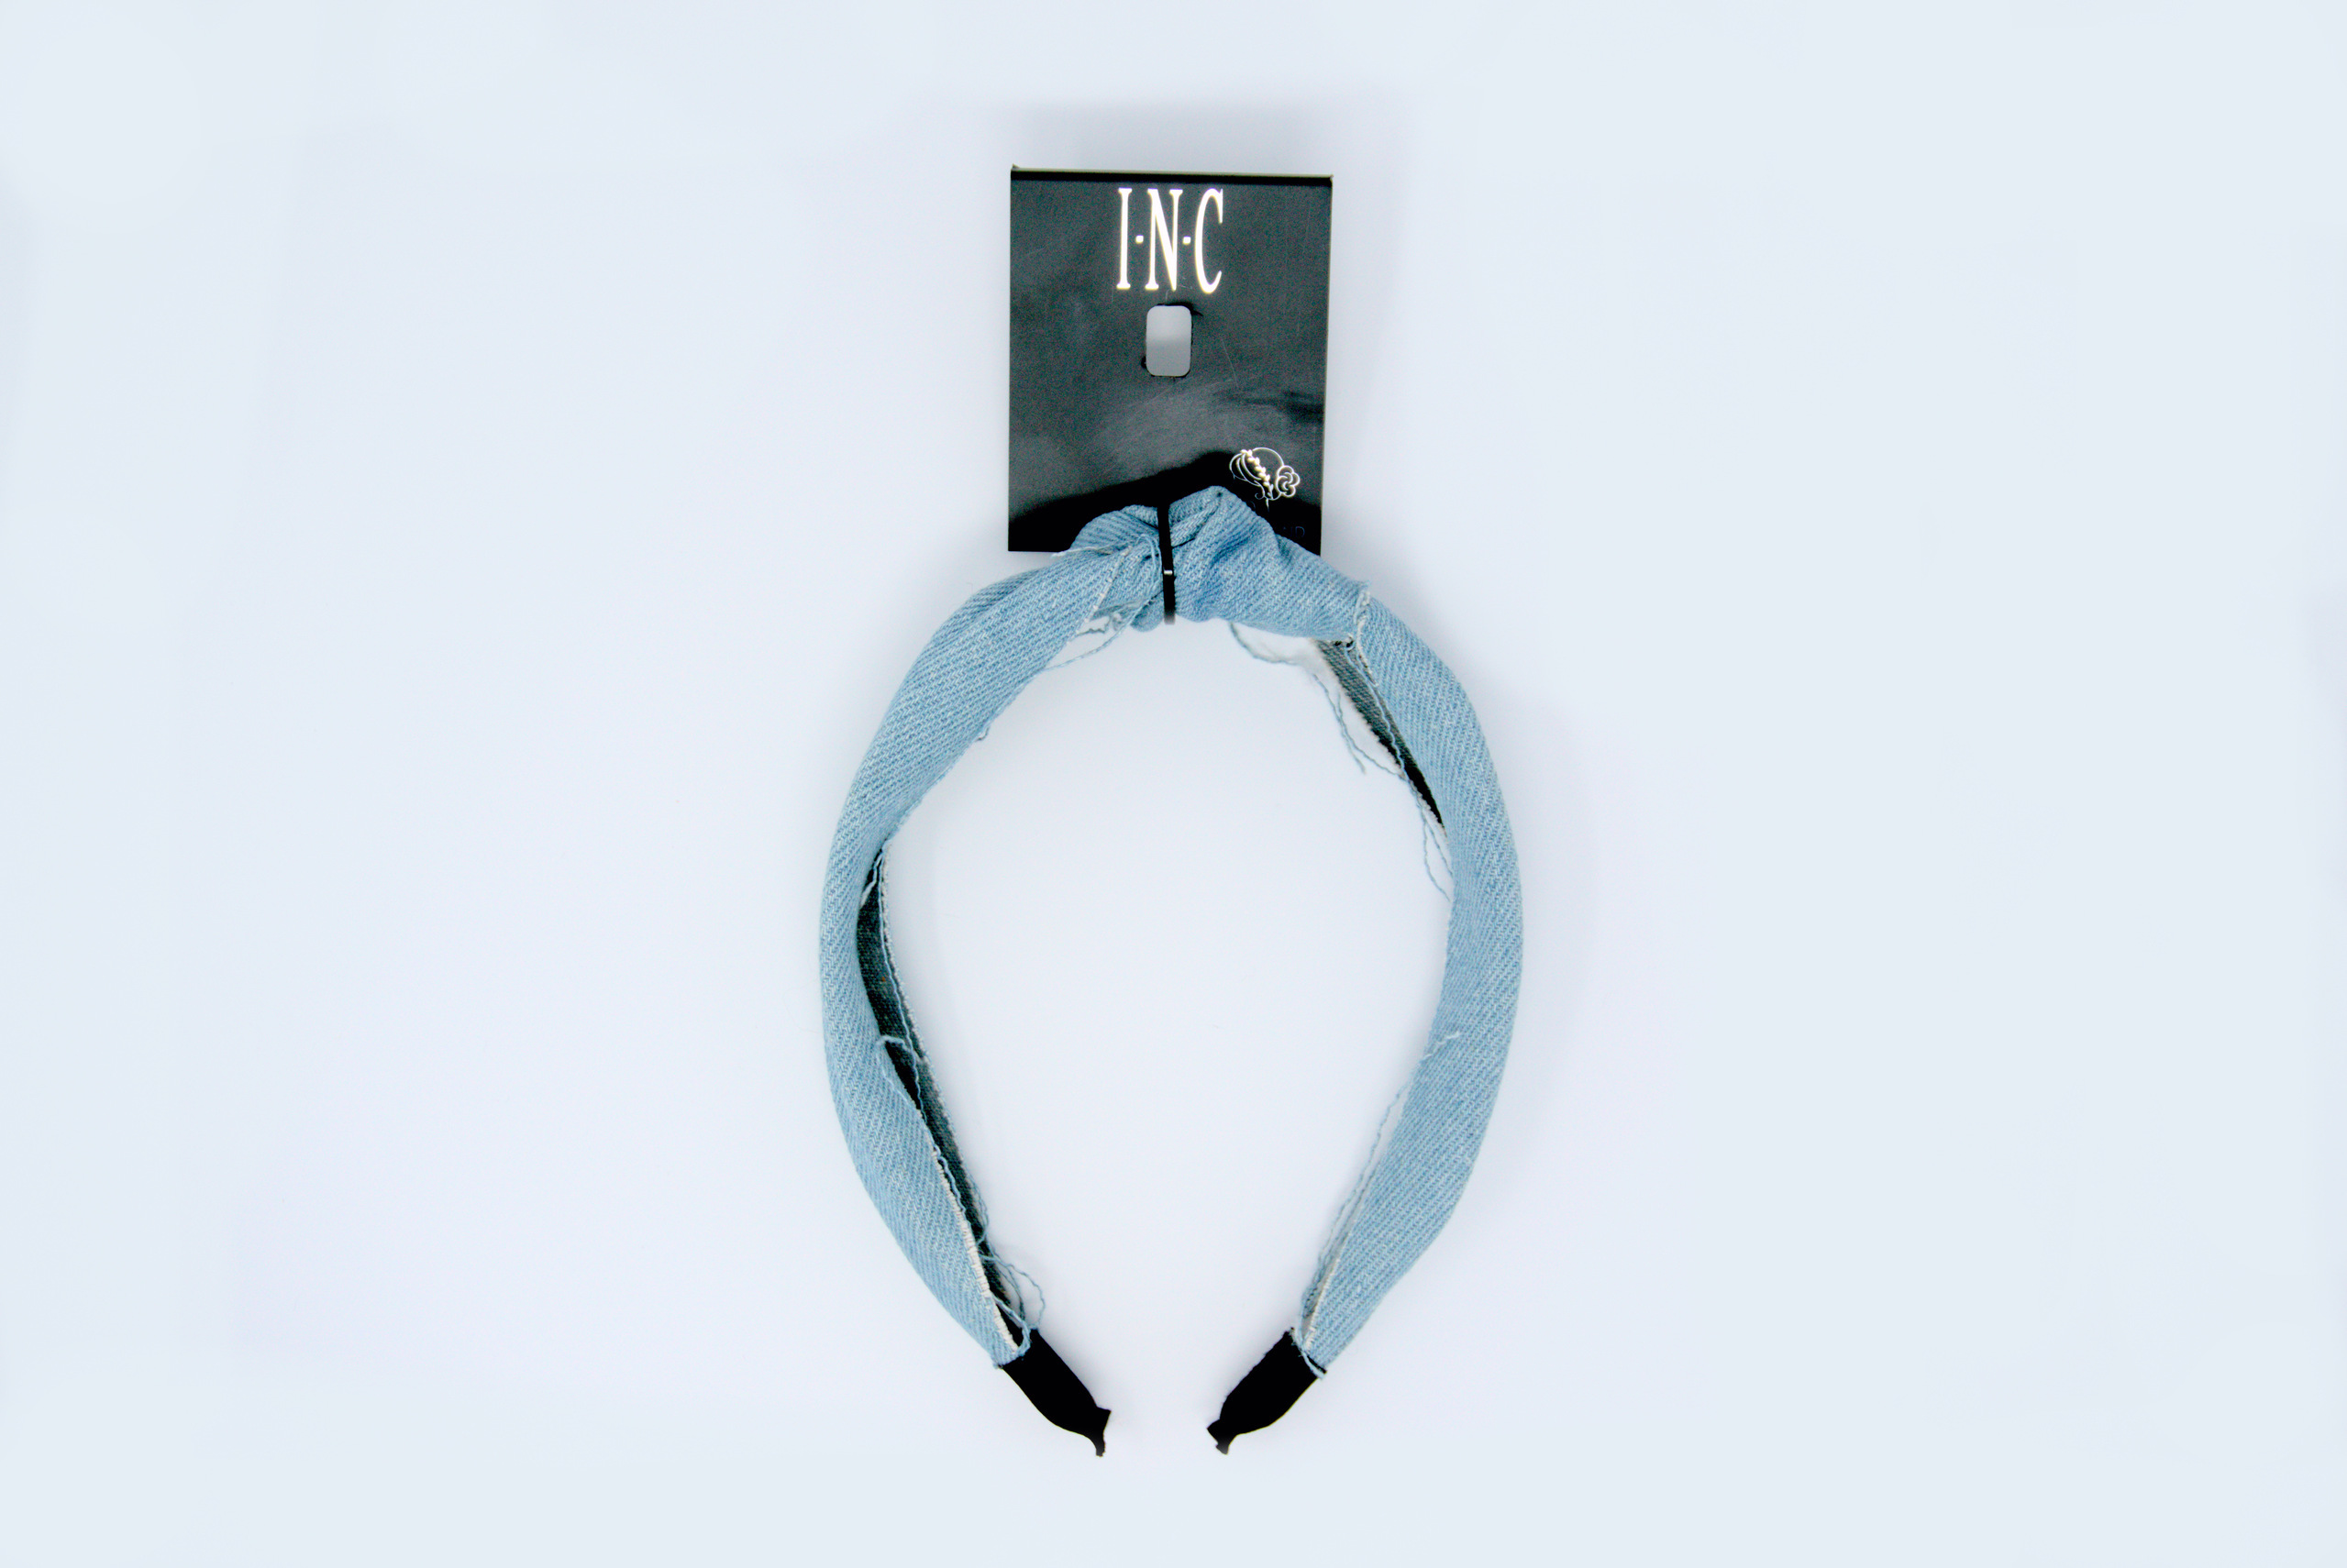 Charm and Lovely Quality Fashion Accessories introduces INC Denim Knotted Headband; color denim blue, material denim and plastic, slip on